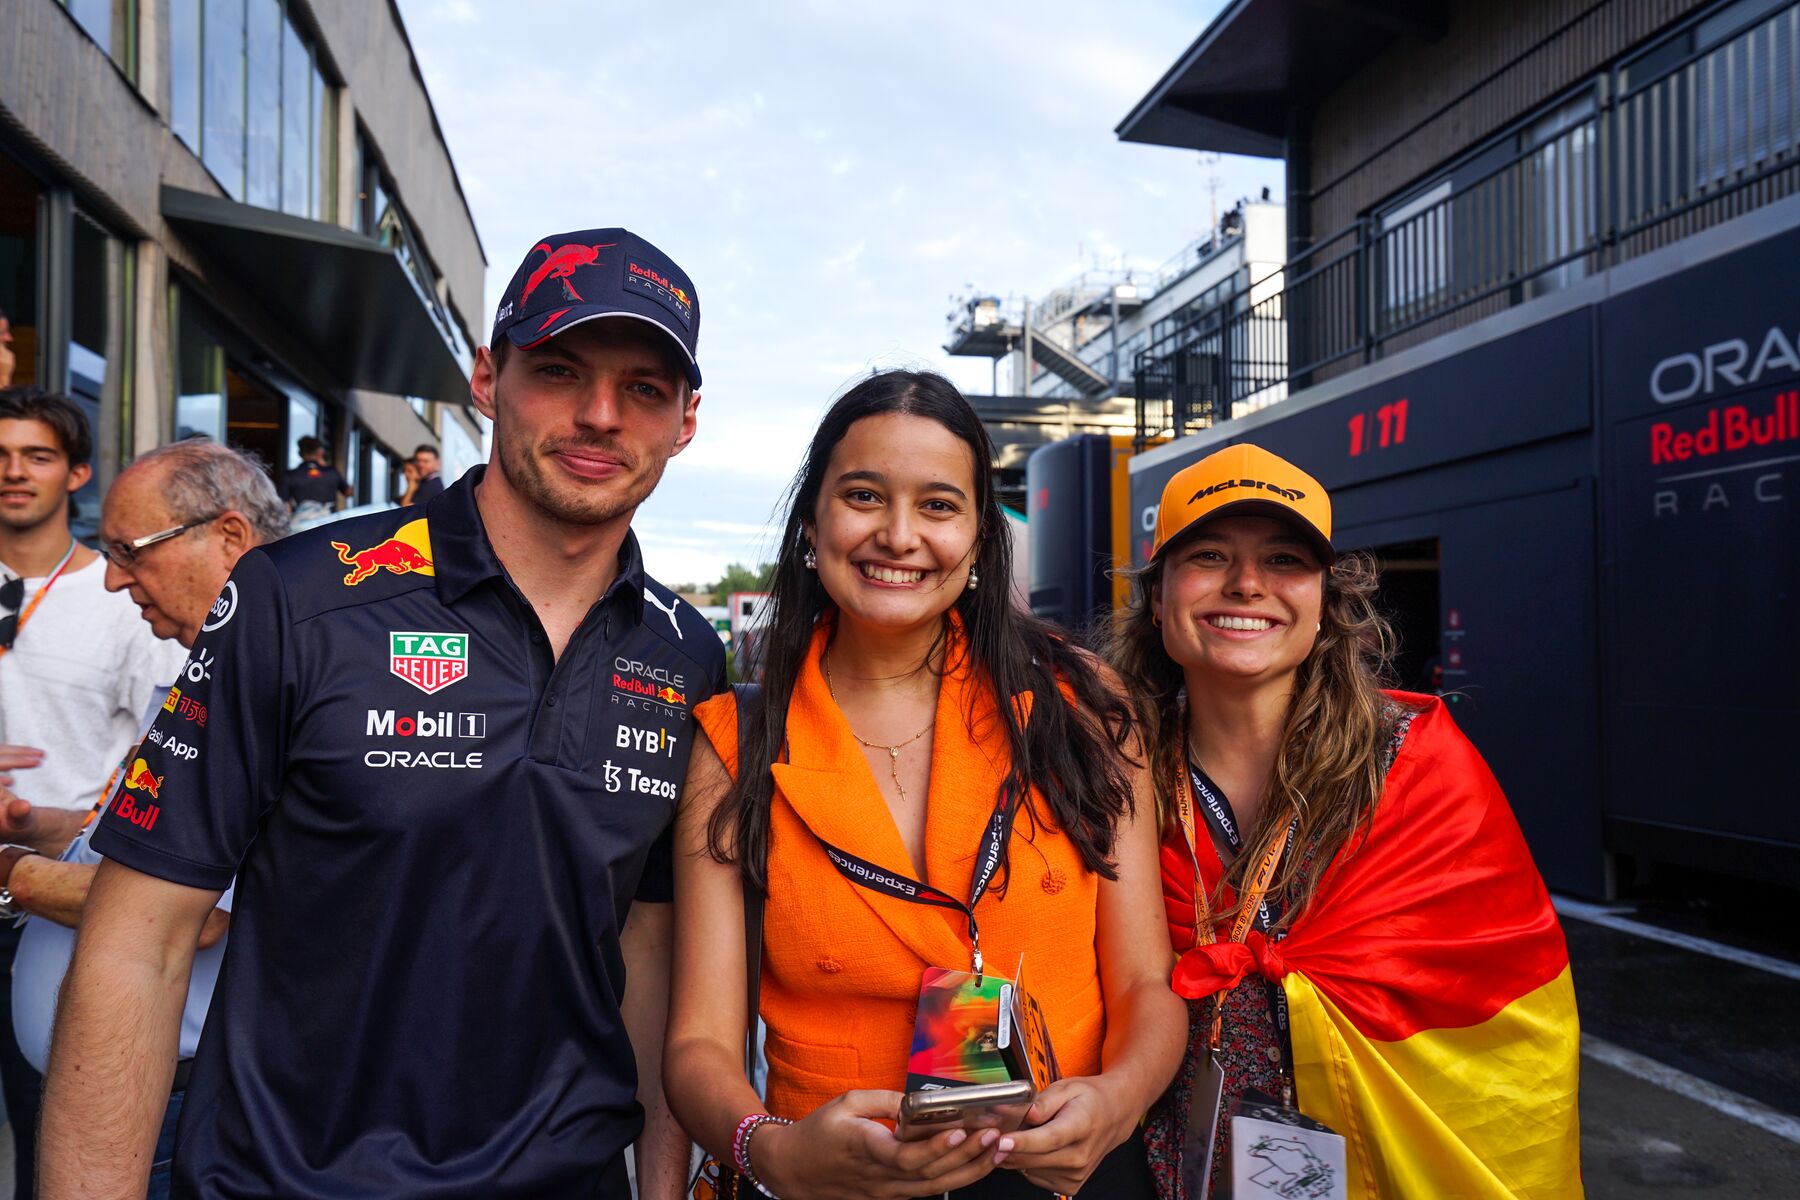 Max with fans